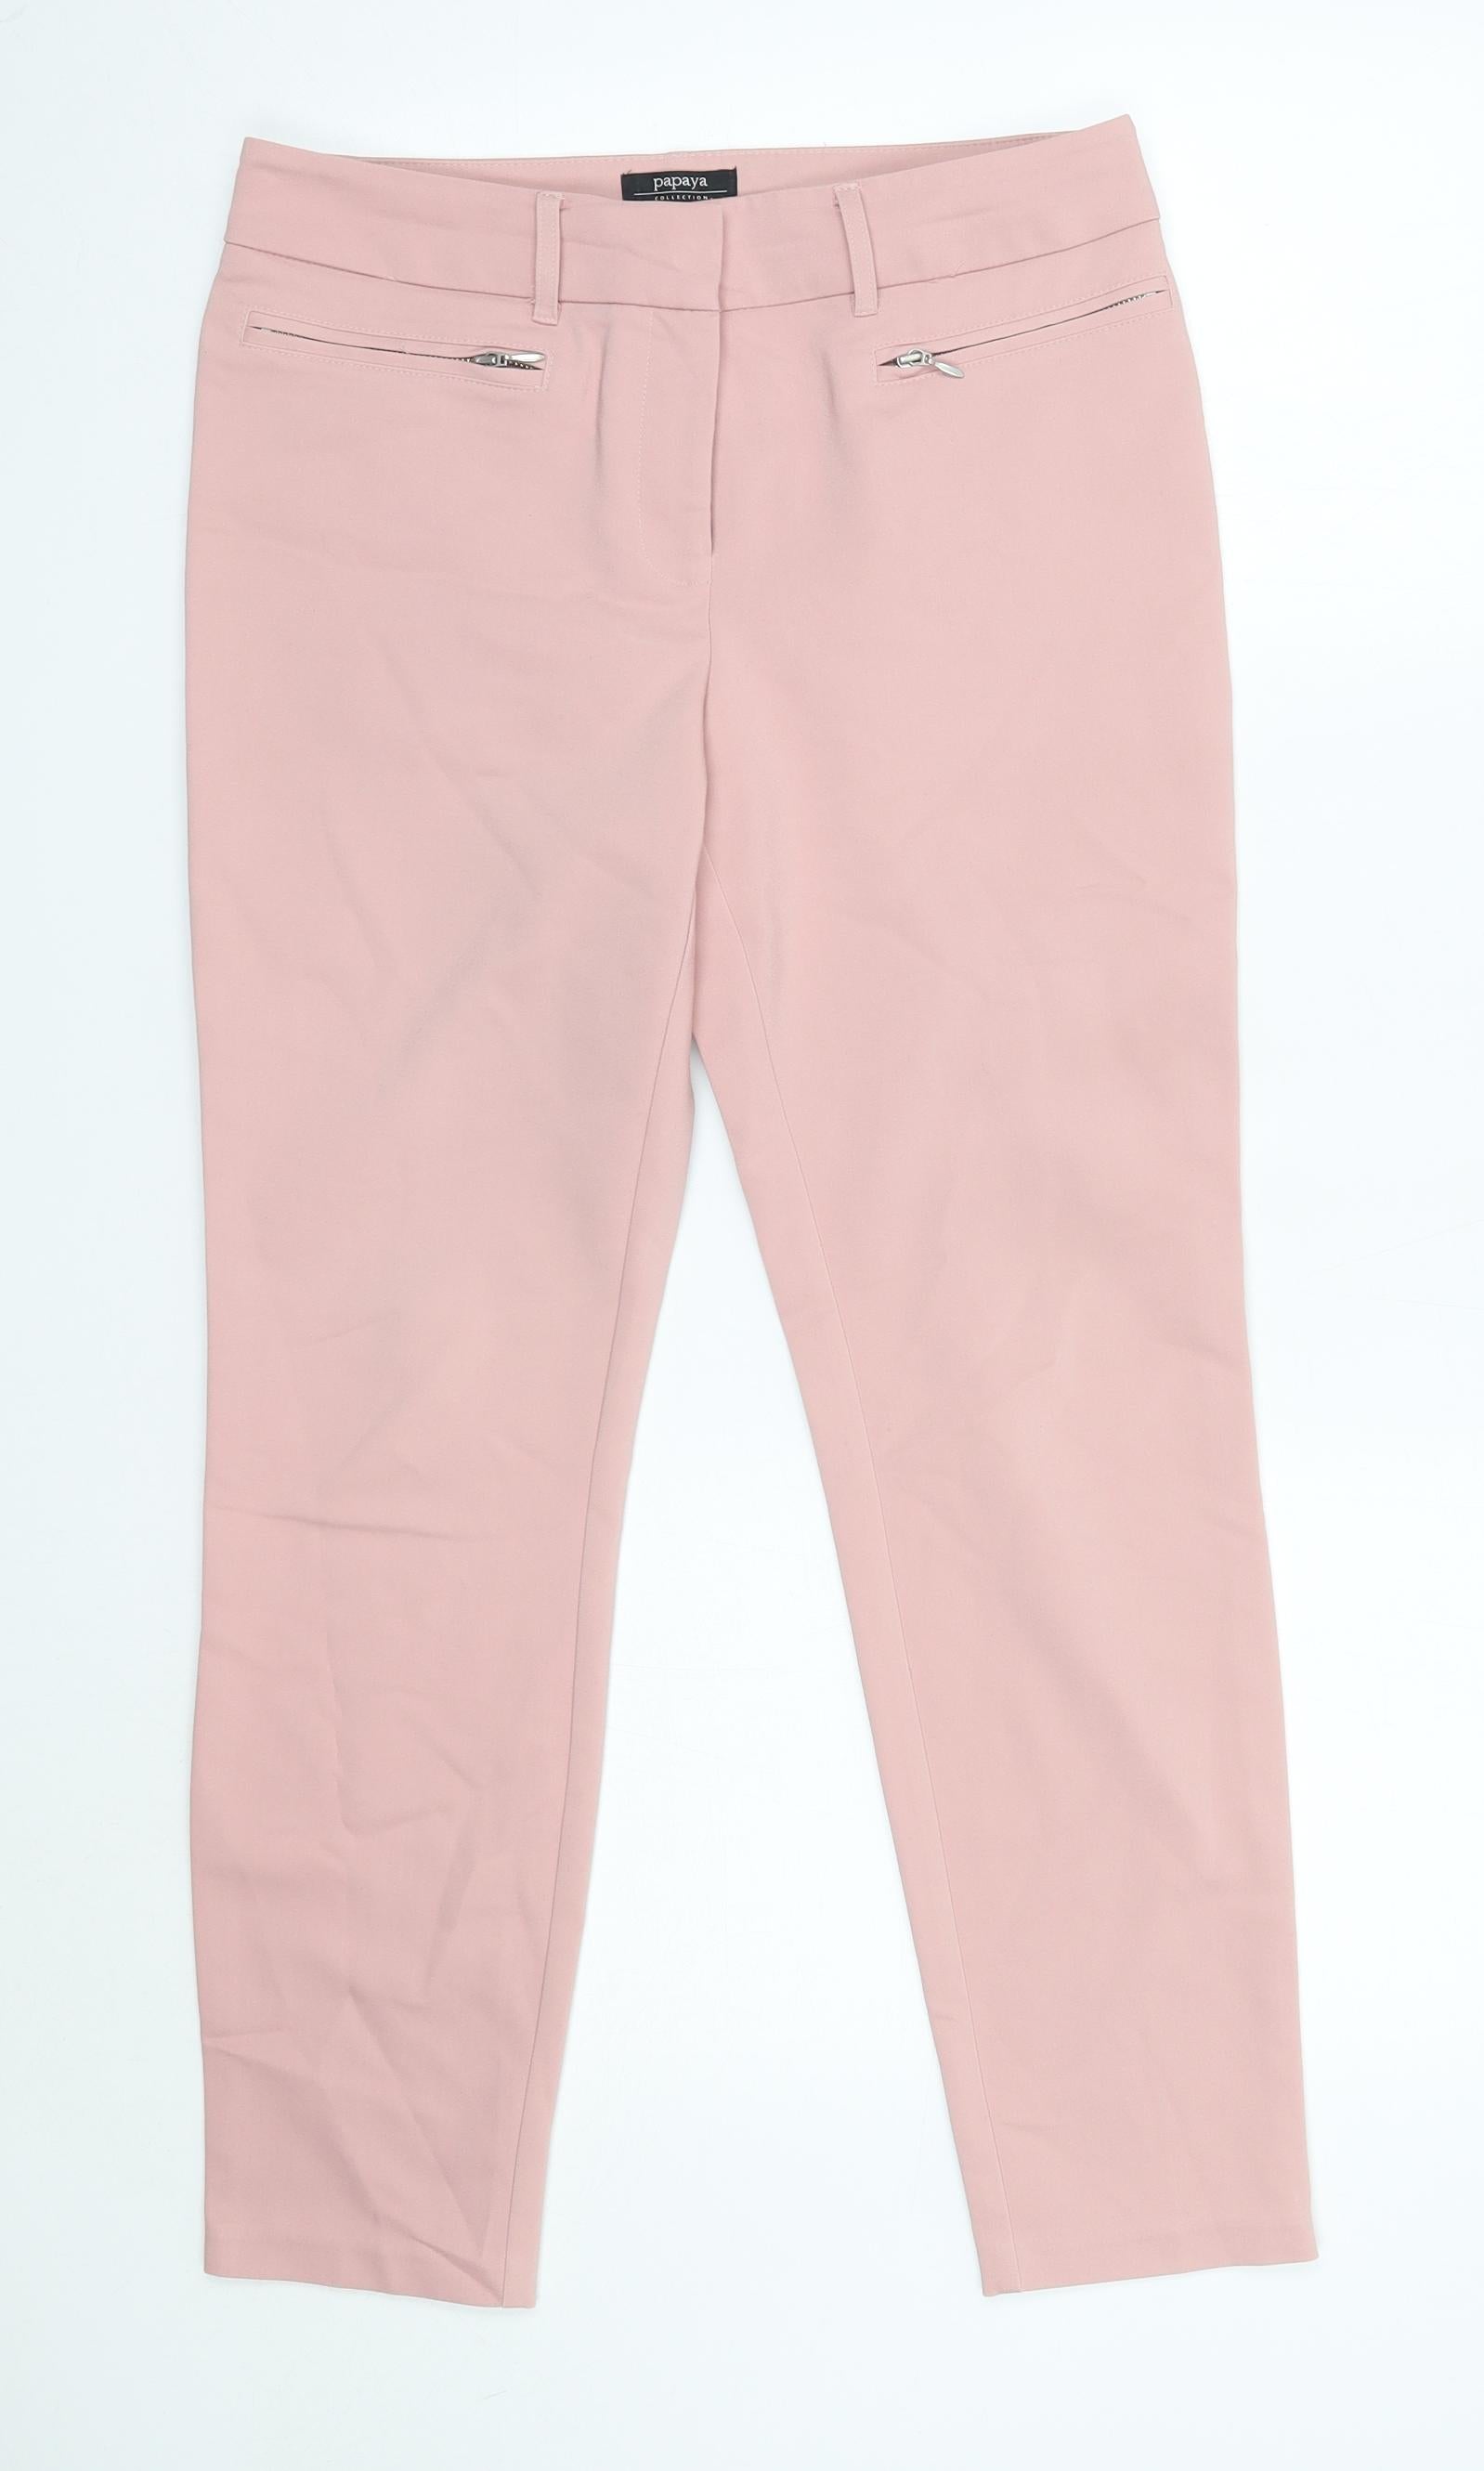 Matalan Womens Pink Cotton Dress Pants Trousers Size 10 L26 in